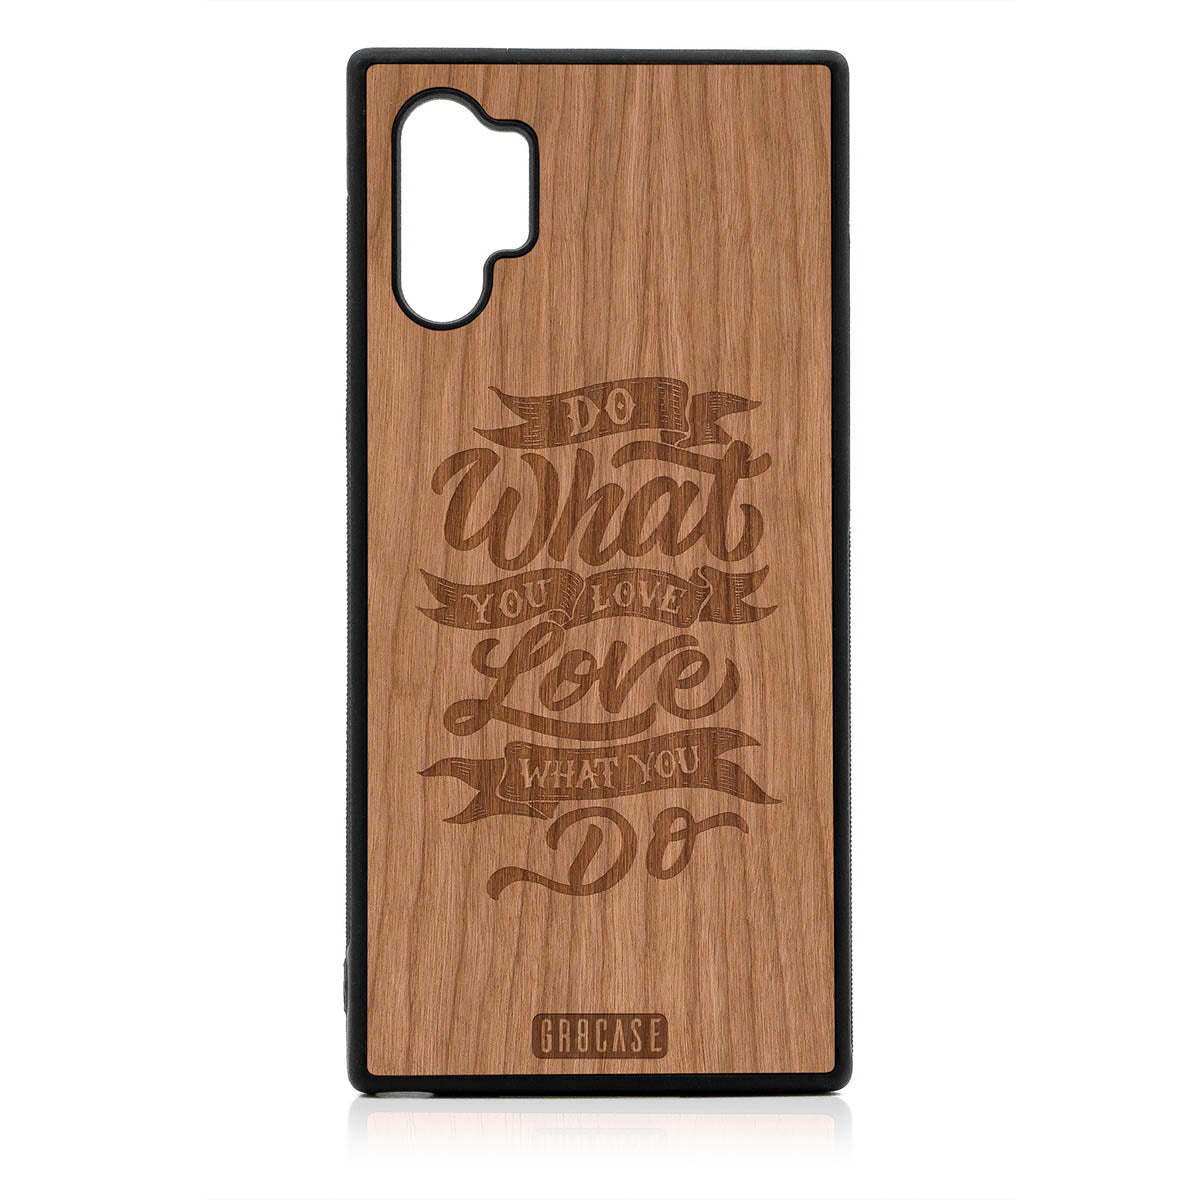 Do What You Love Love What You Do Design Wood Case For Samsung Galaxy Note 10 Plus by GR8CASE